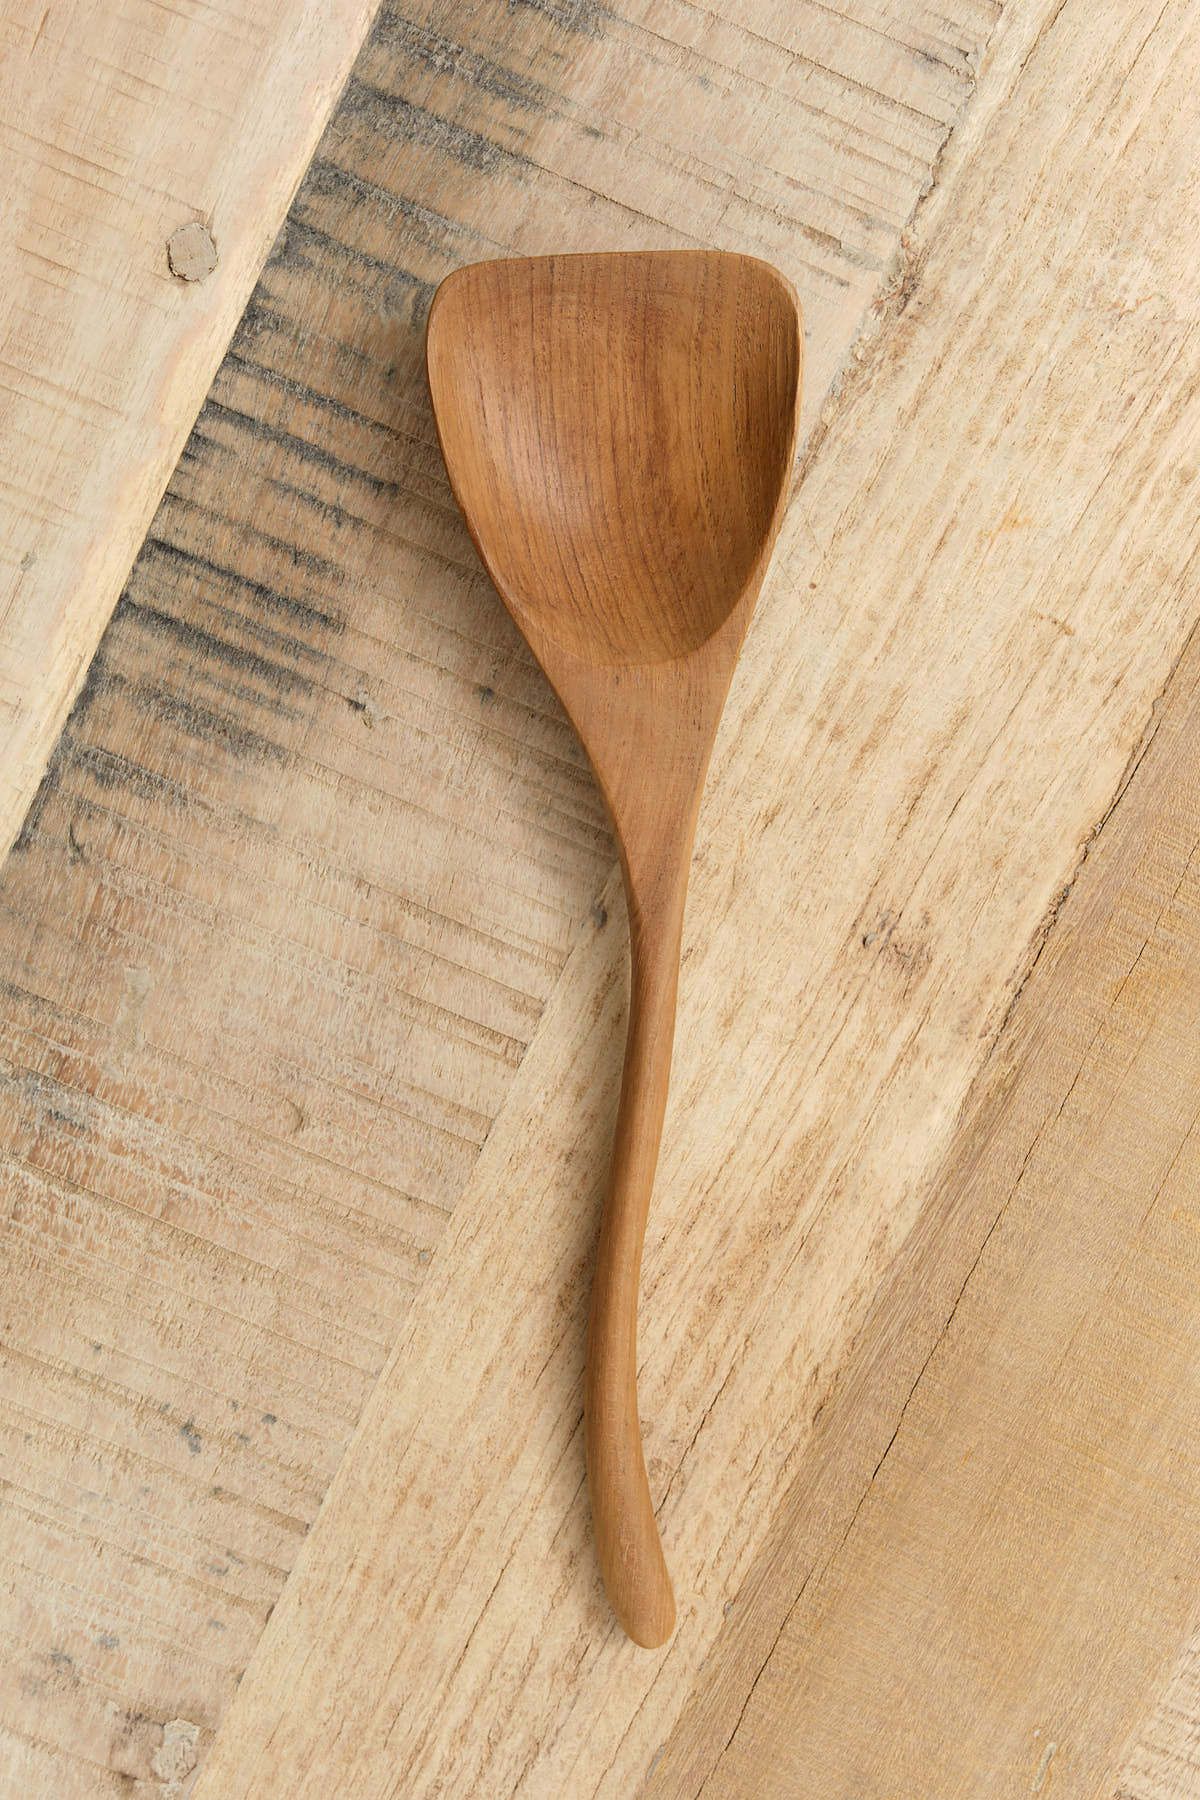 Teak Spatula with Natural Handle by Be Home